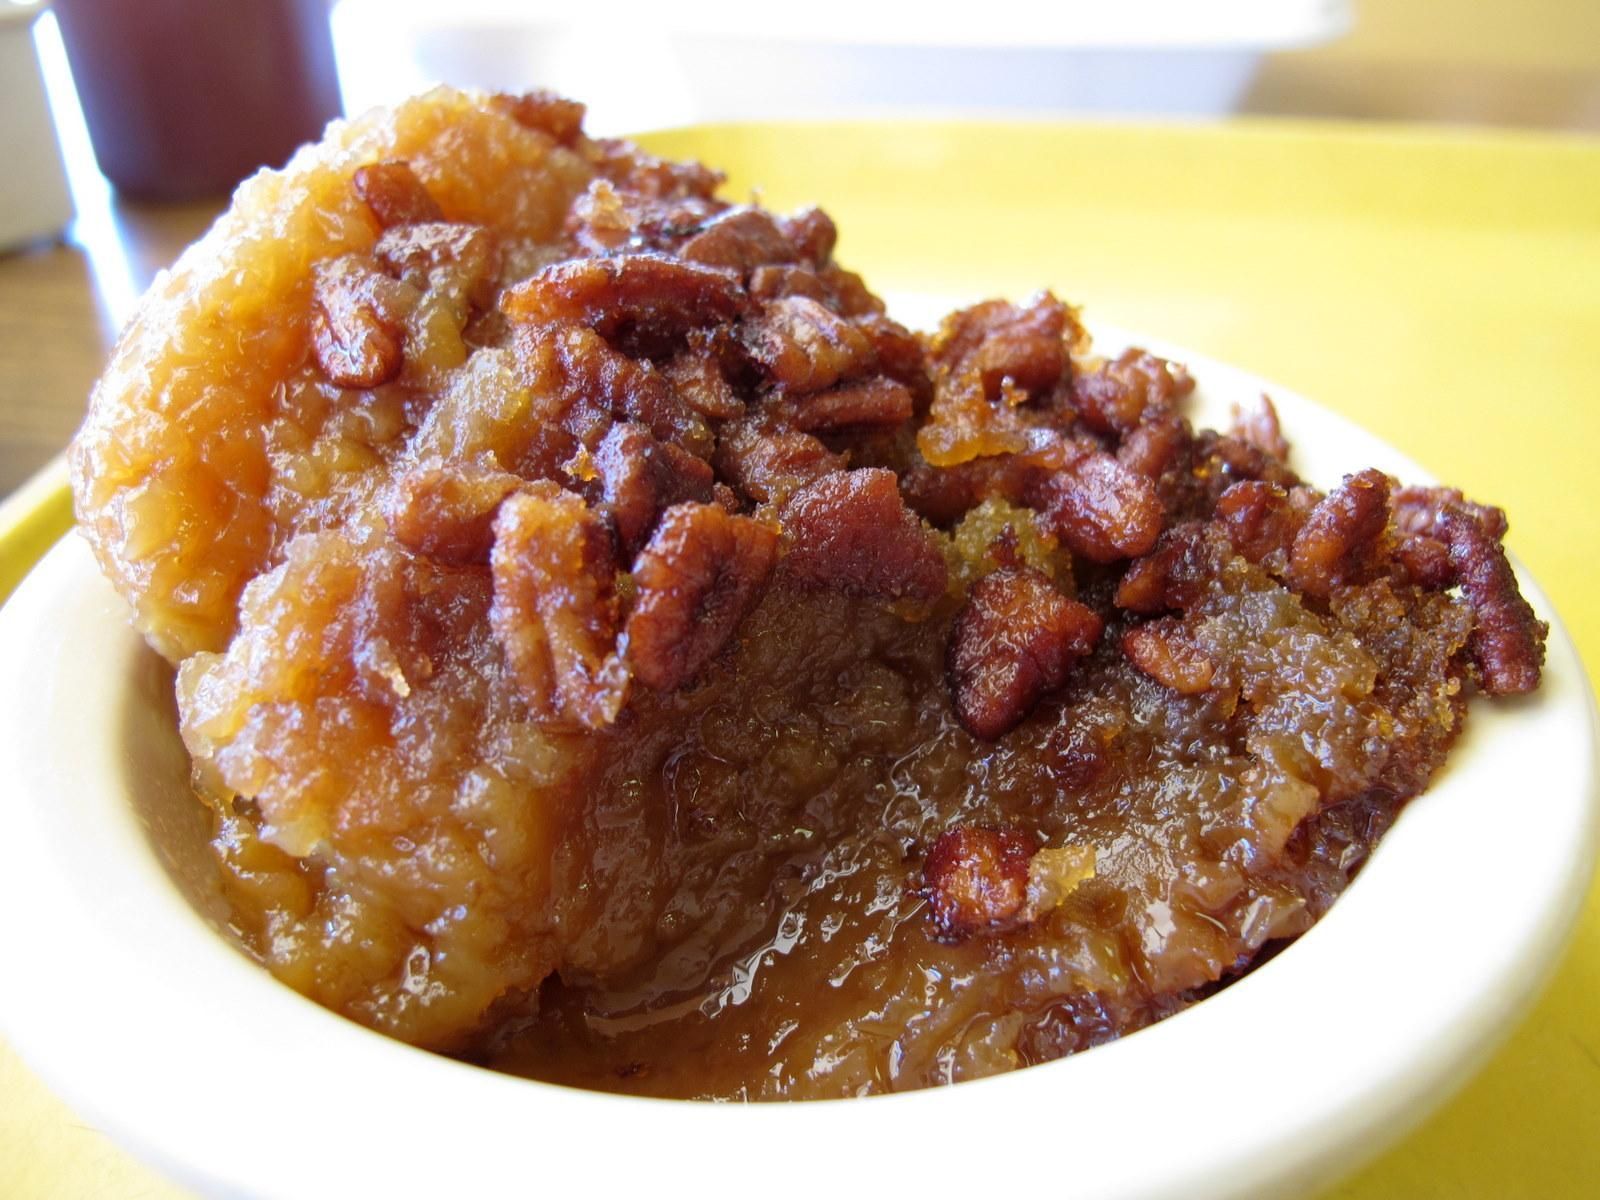 Pecan cobbler: of my goodness I cant wait to make it…its like pie for a crowd.